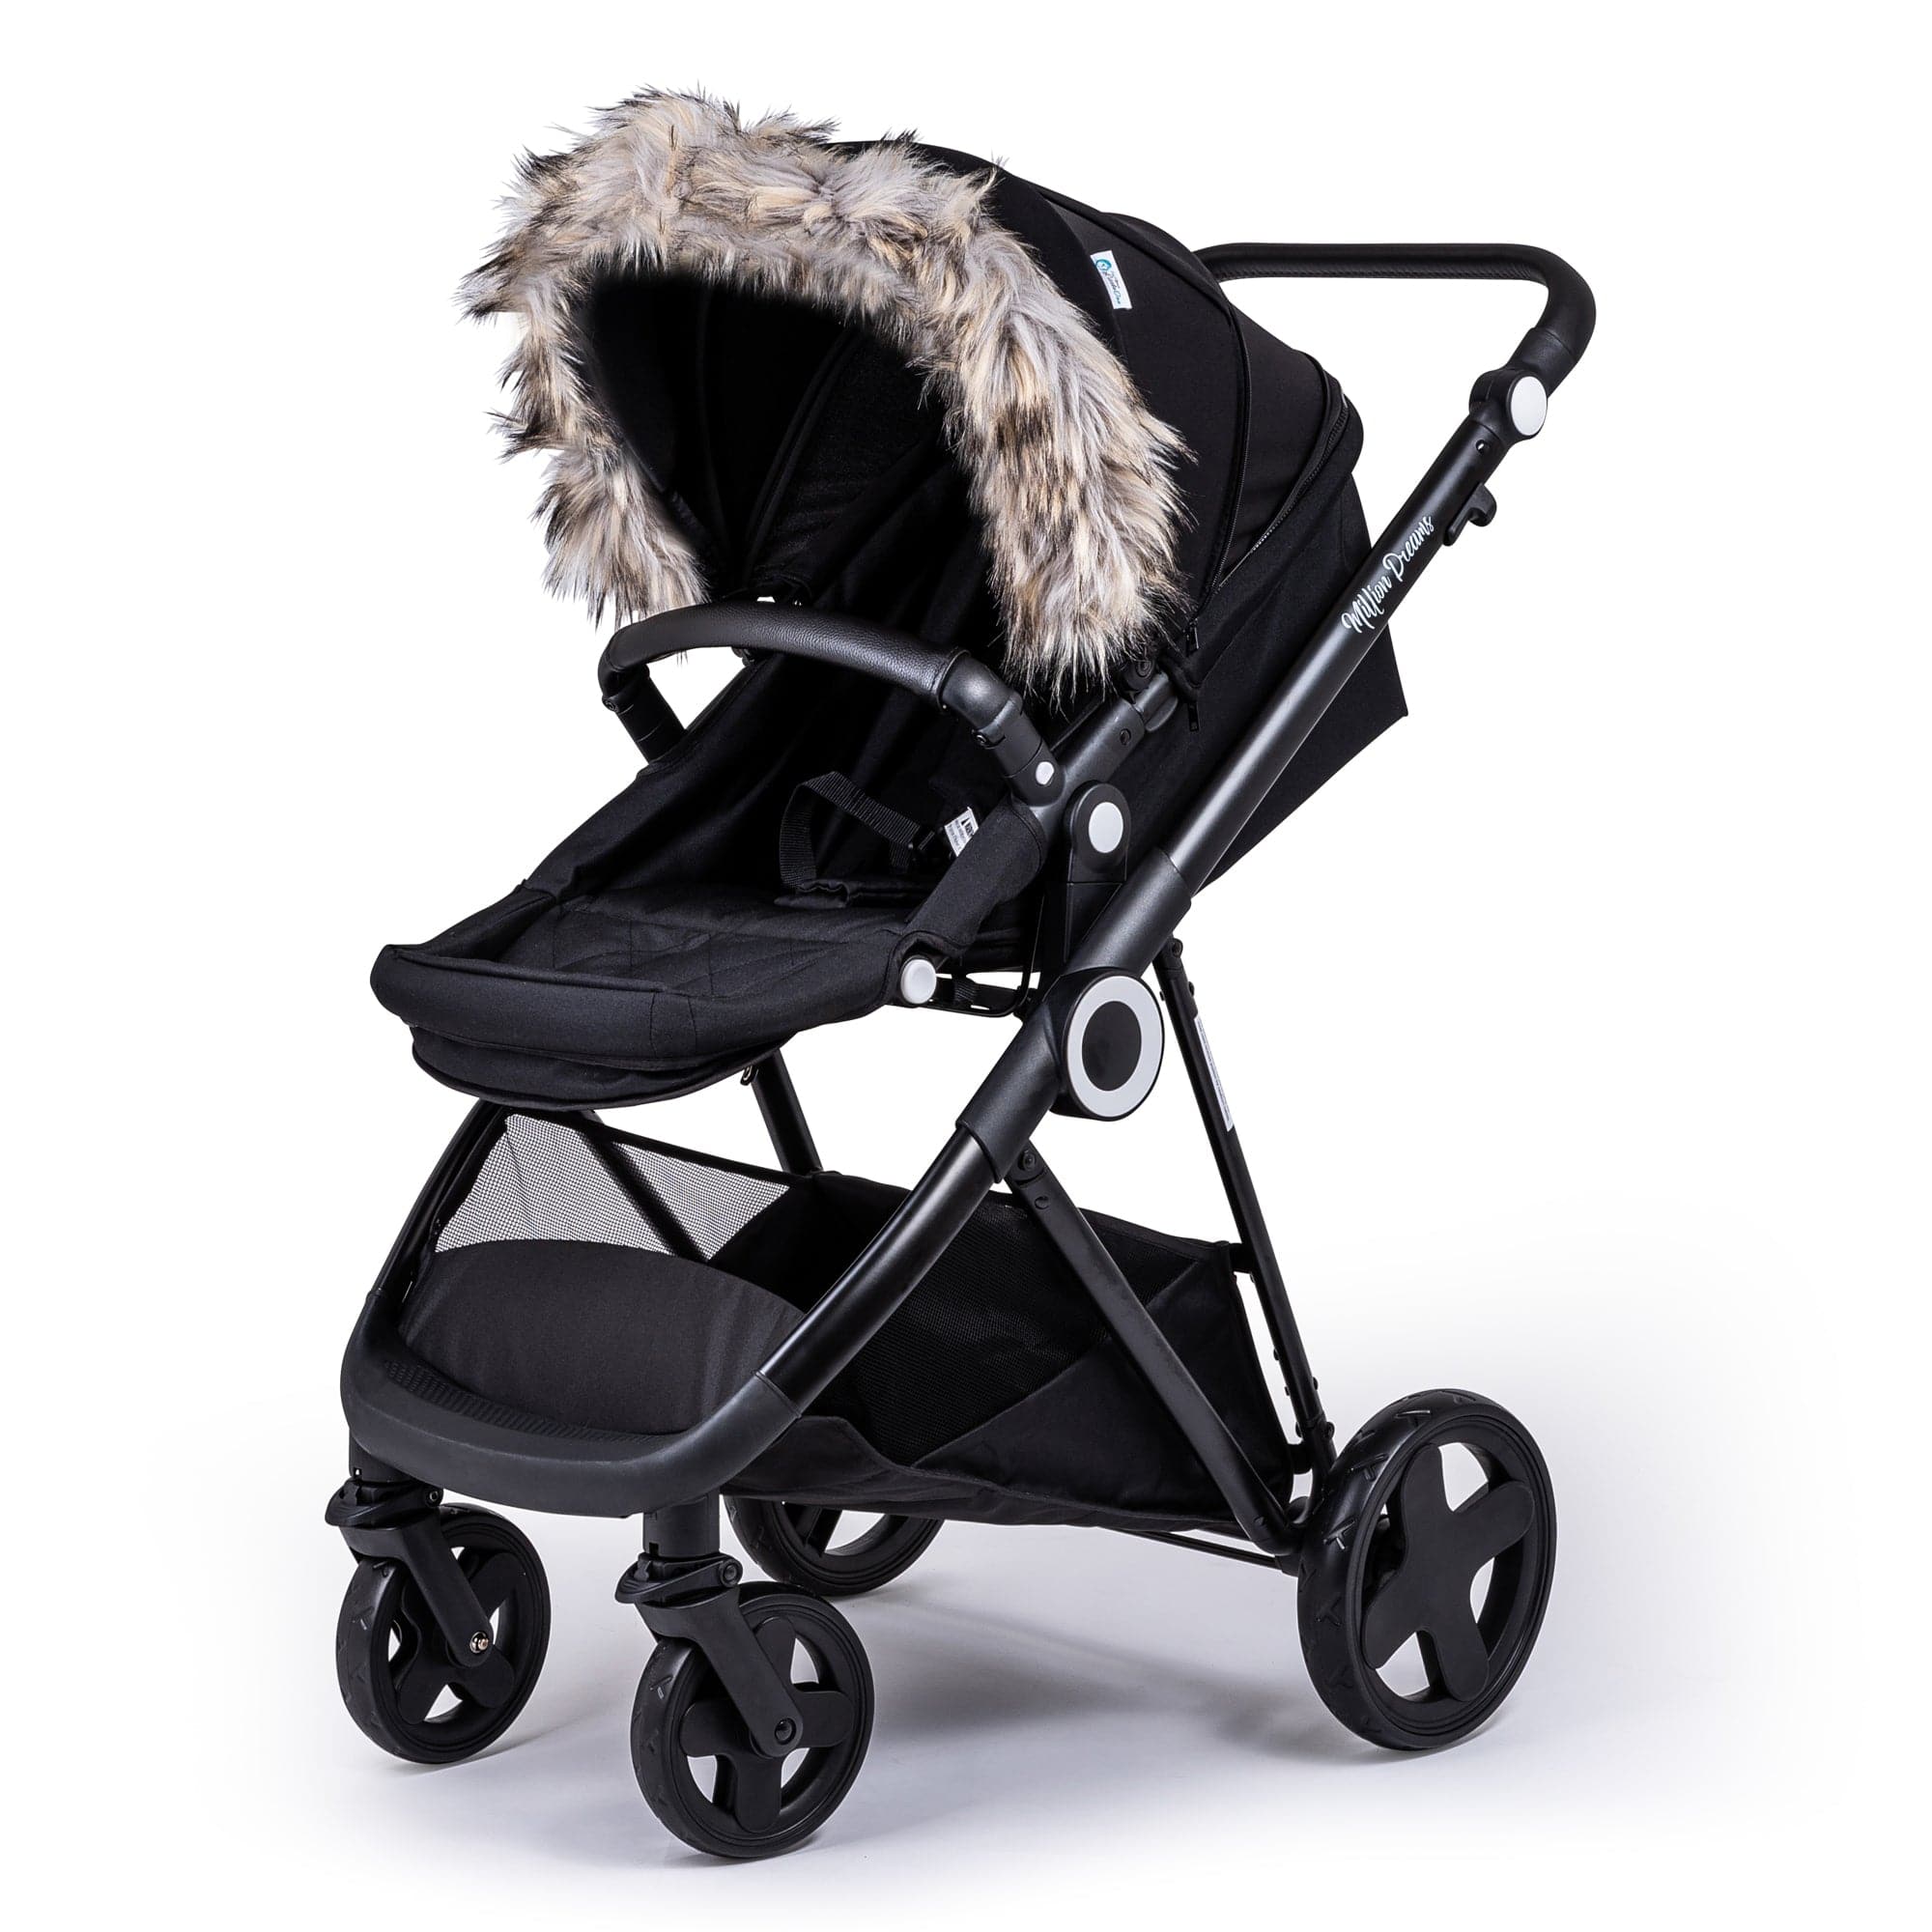 Pram Fur Hood Trim Attachment For Pushchair Compatible with Diono - For Your Little One